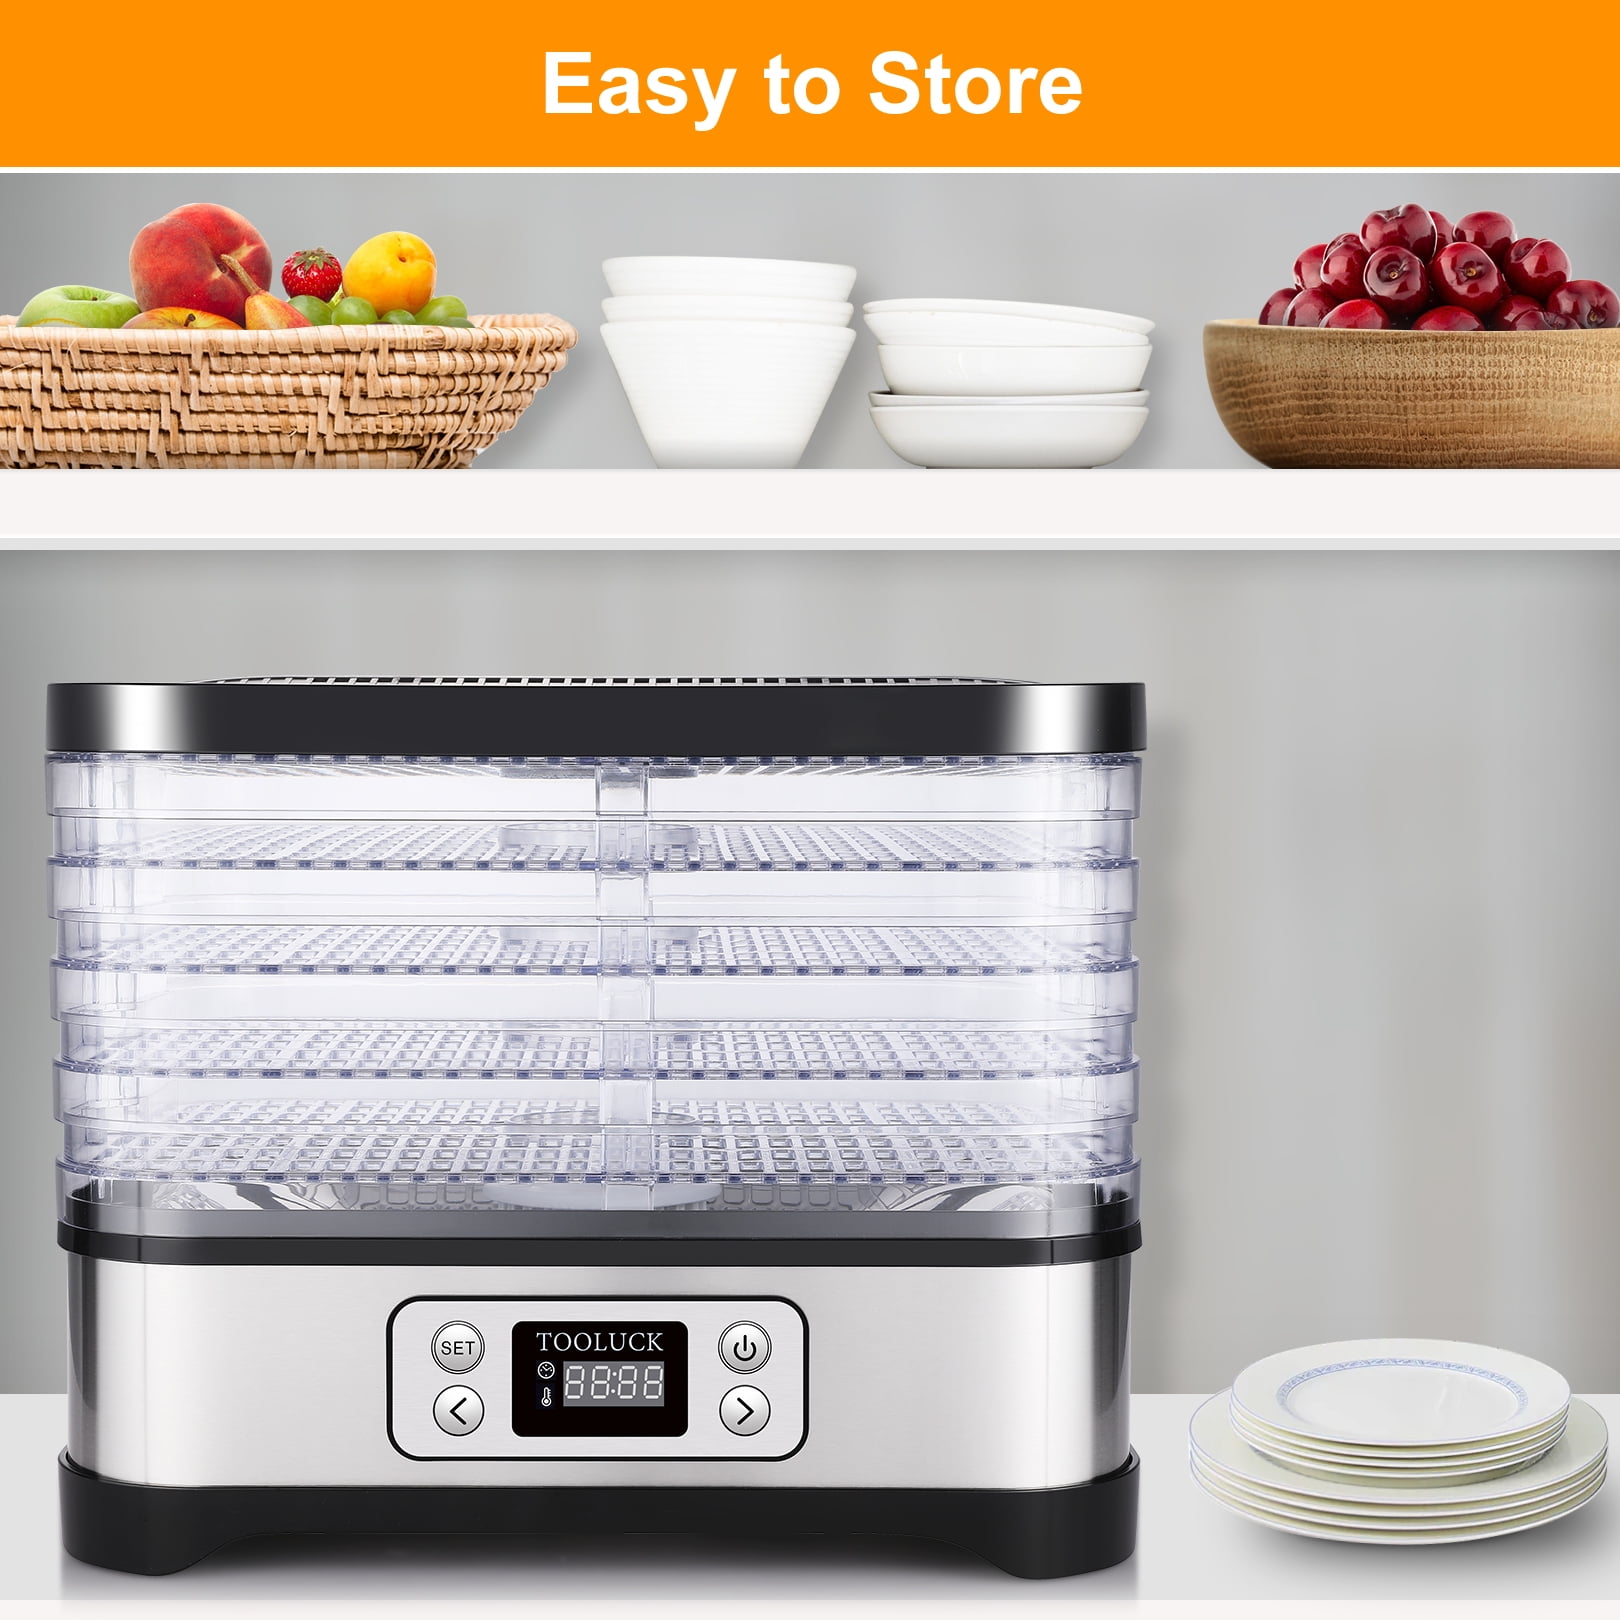 DELLA Deluxe Food Dehydrator Meat or Beef Jerky Maker, Fruit & Vegetable  Dryer with 11 Slide Out Tray & Transparent Door - Bed Bath & Beyond -  24249852